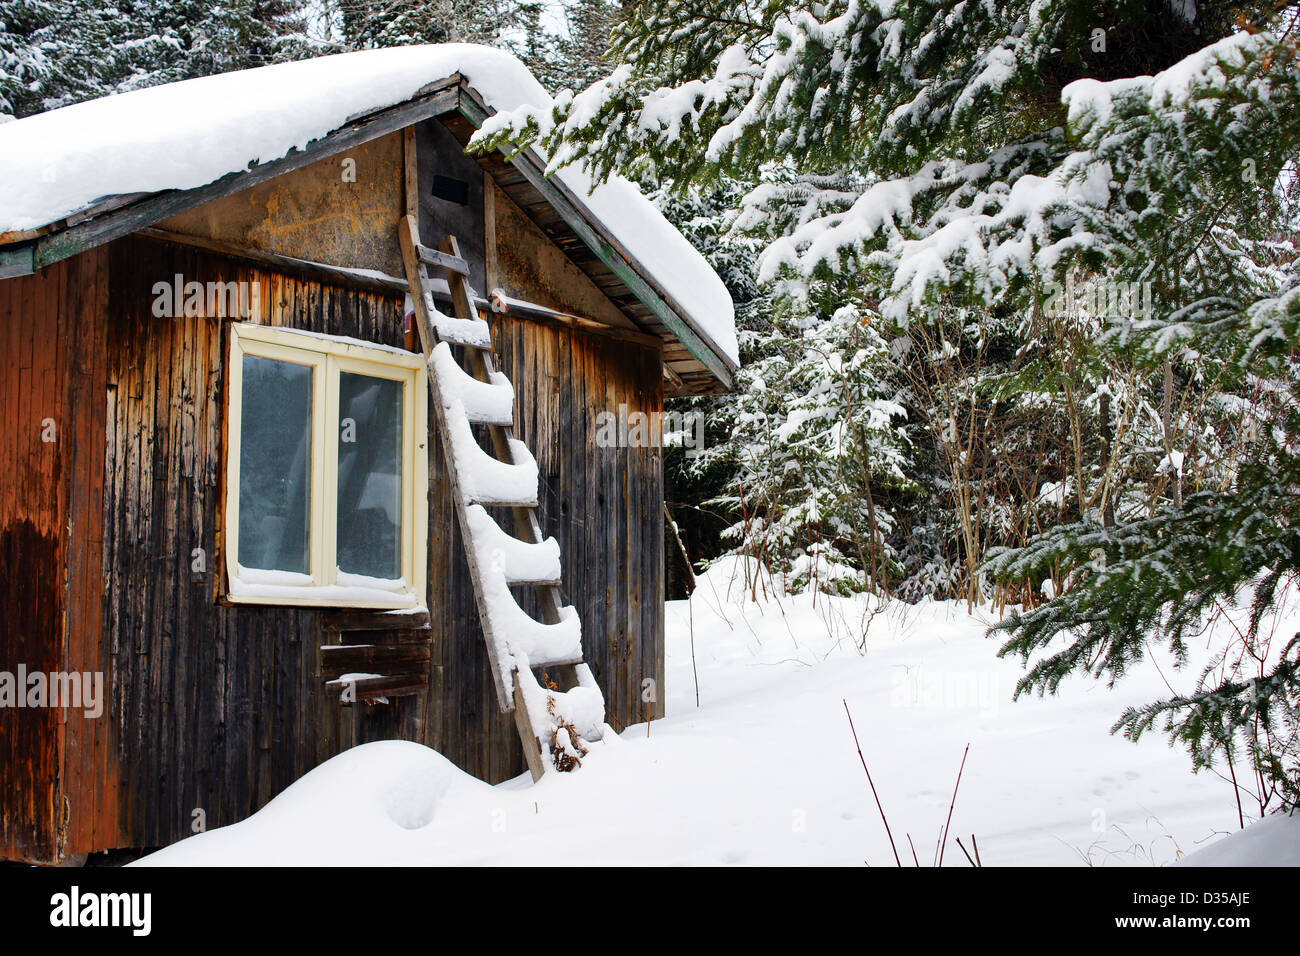 https://c8.alamy.com/comp/D35AJE/old-wood-cabin-with-ladder-covered-by-the-thick-snow-on-a-cold-winter-D35AJE.jpg